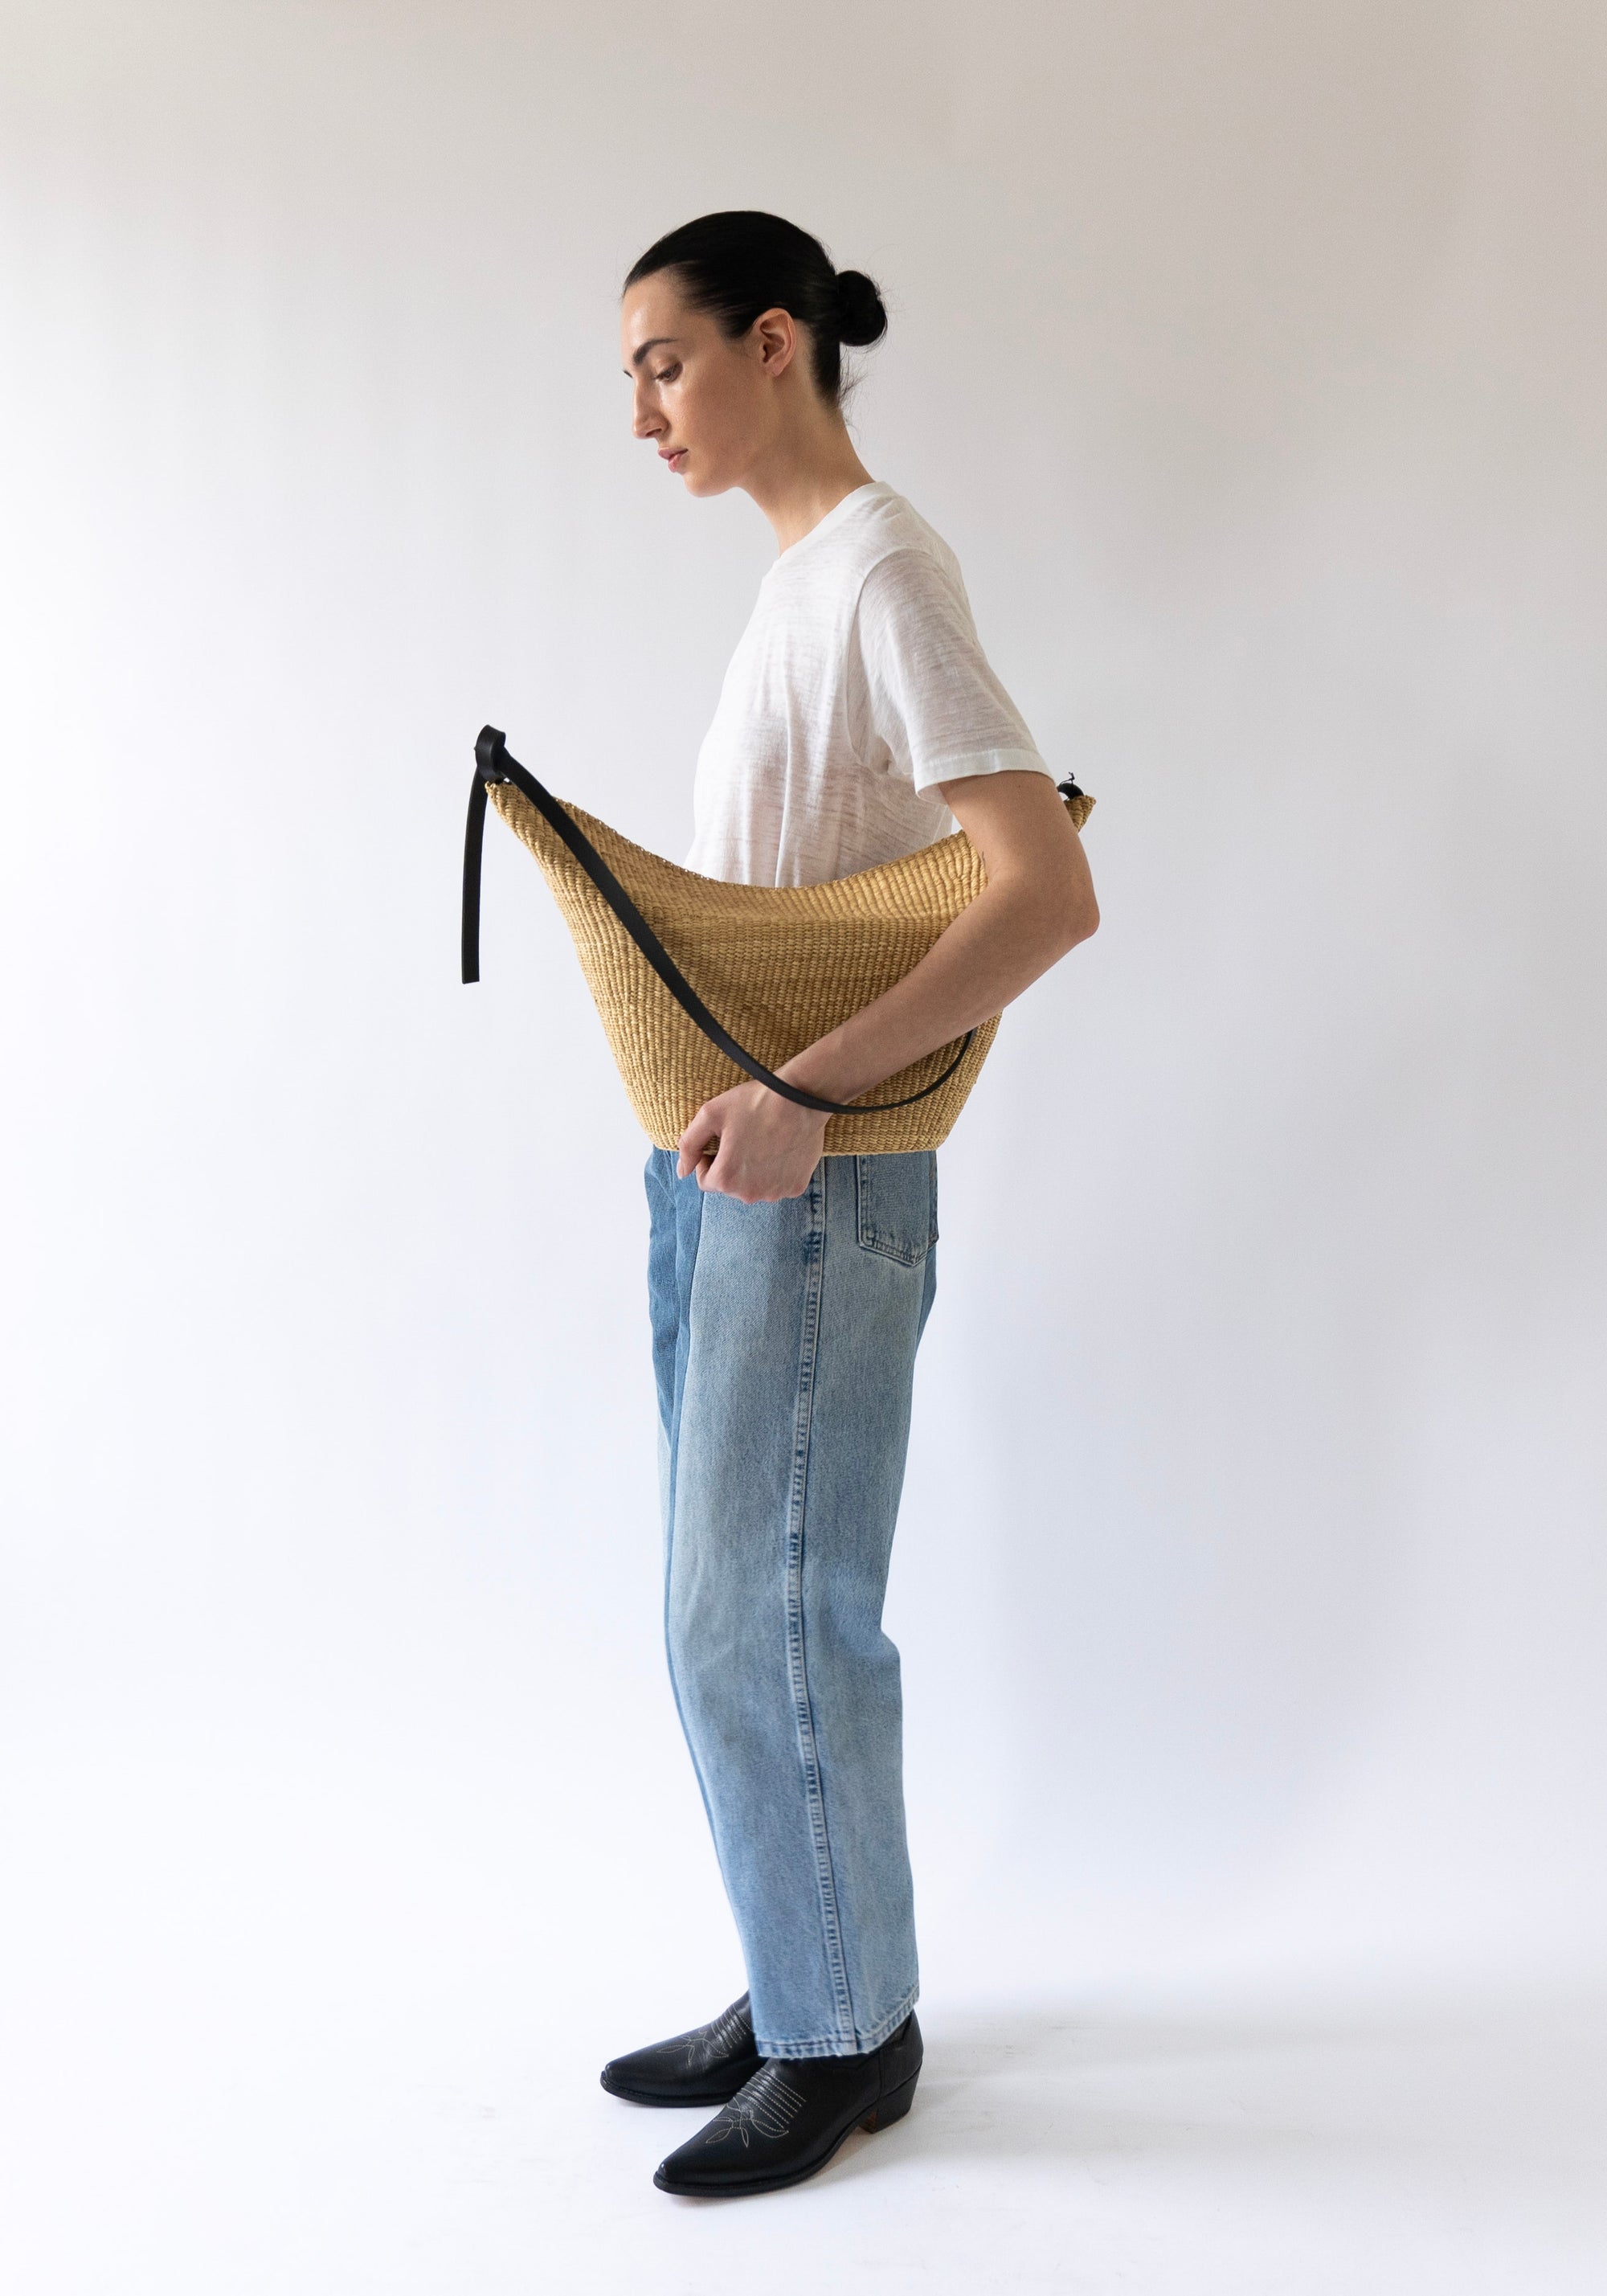 Large Croissant Straw Bag No.35 in Natural